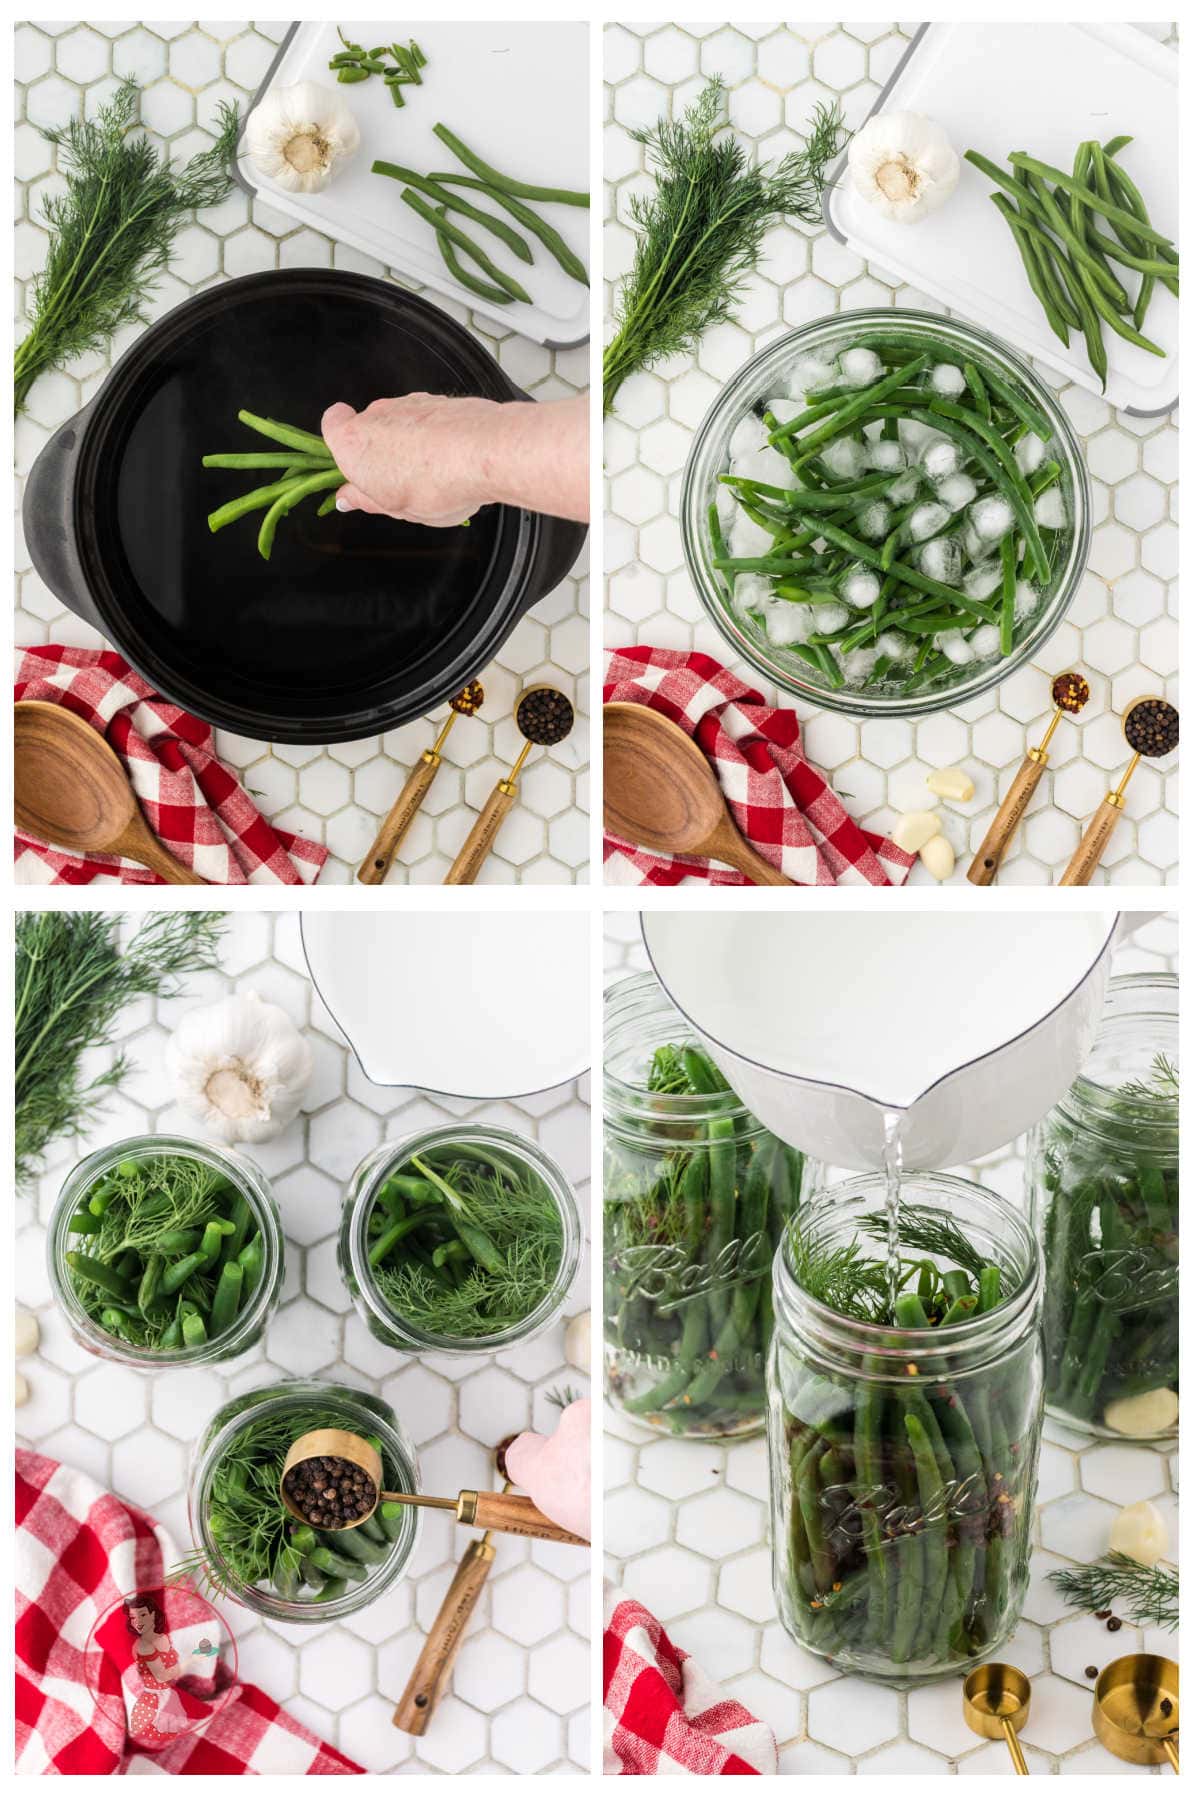 Step by step images showing how to make these green bean pickles in the refrigerator.